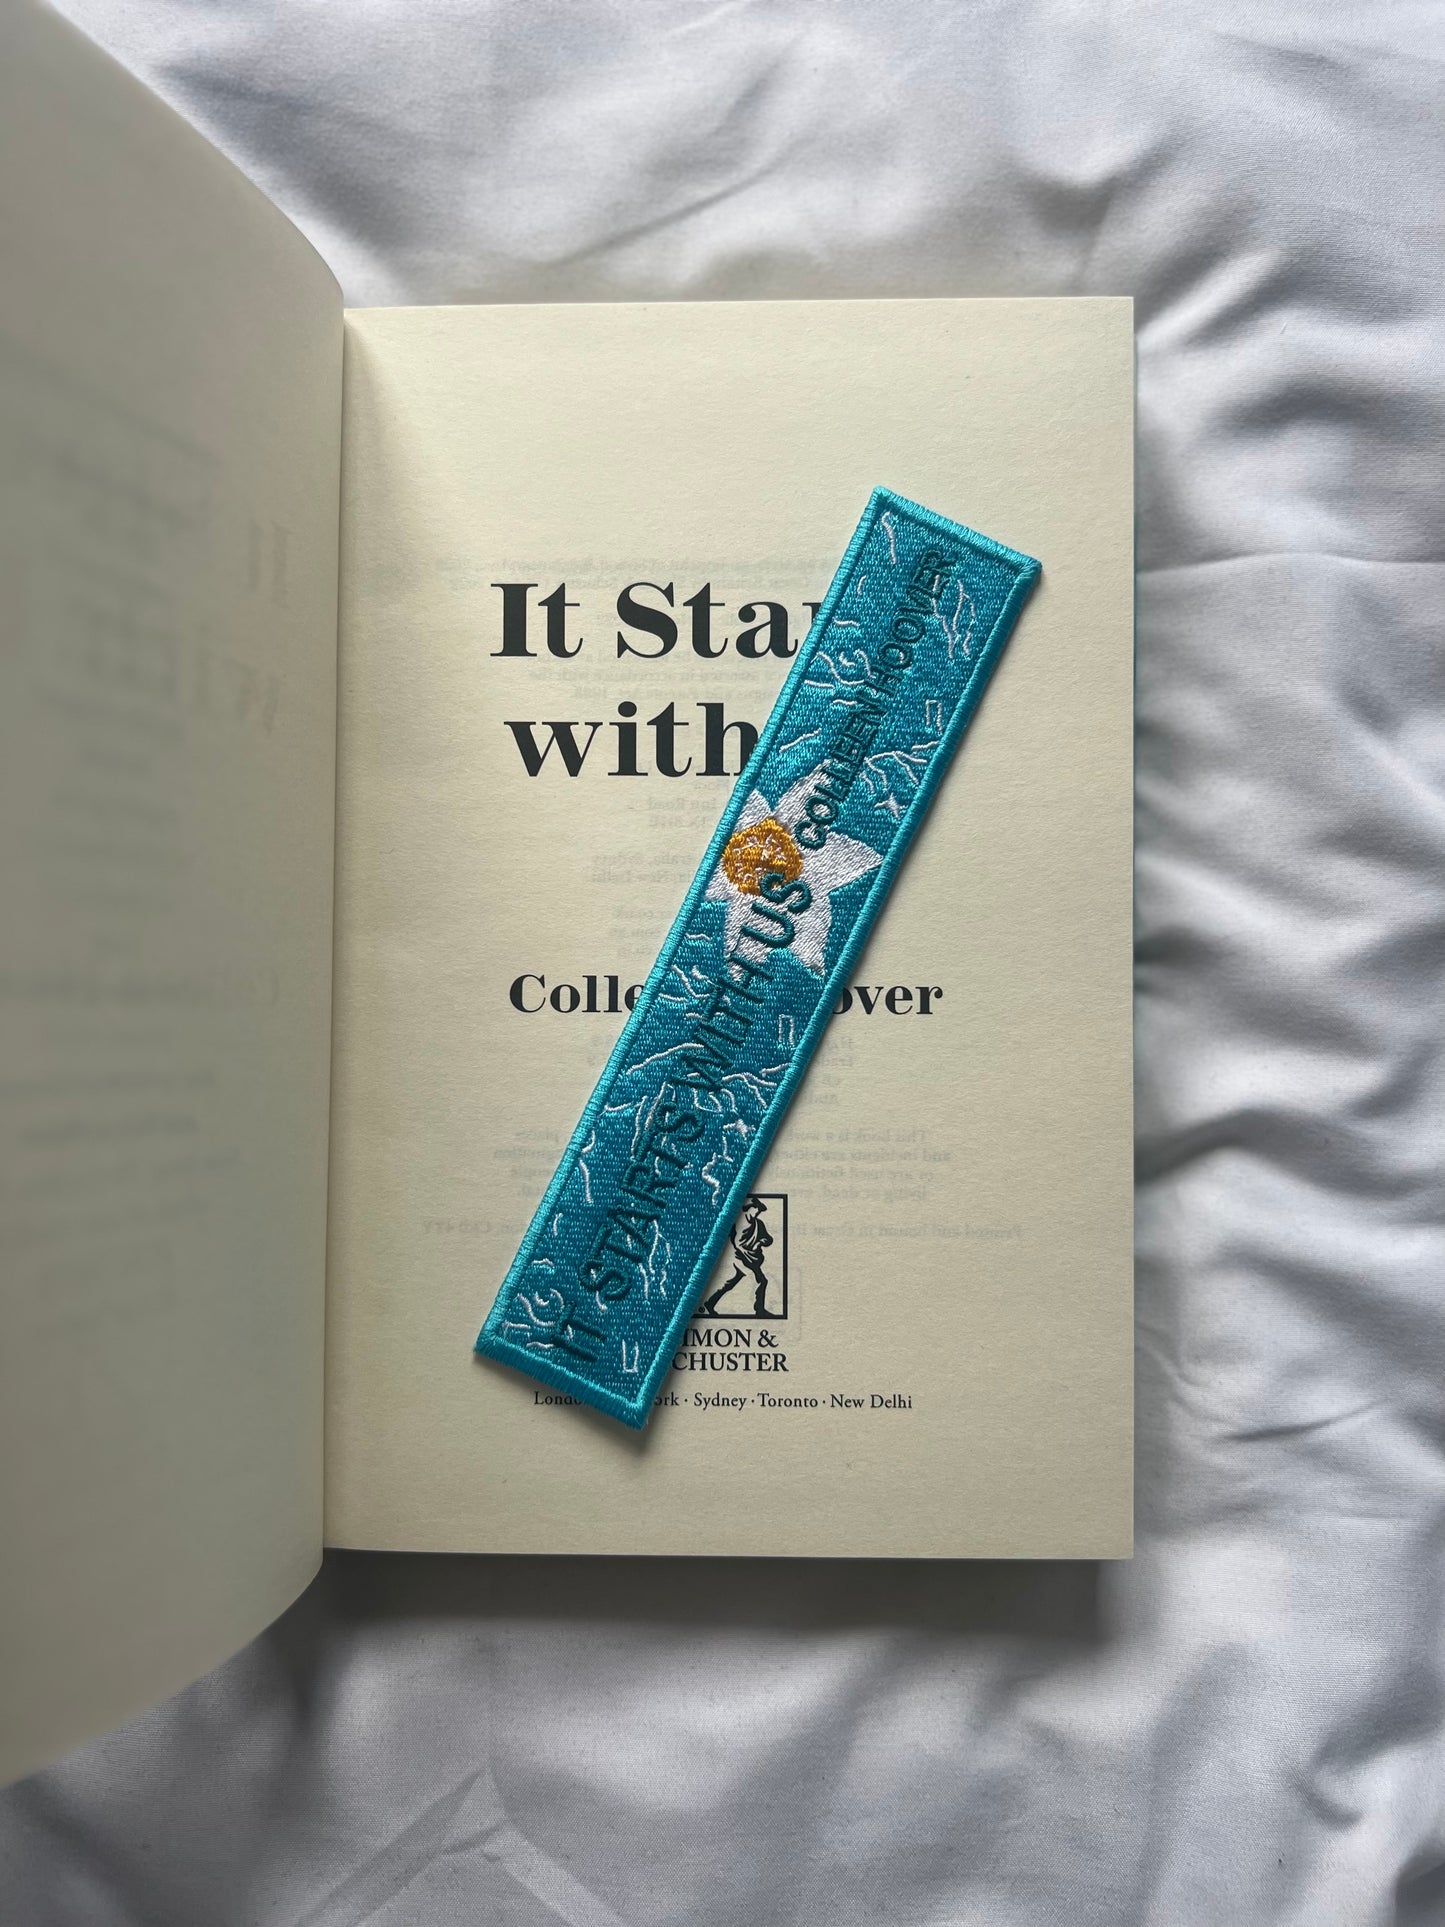 It starts with us Embroidered Bookmark